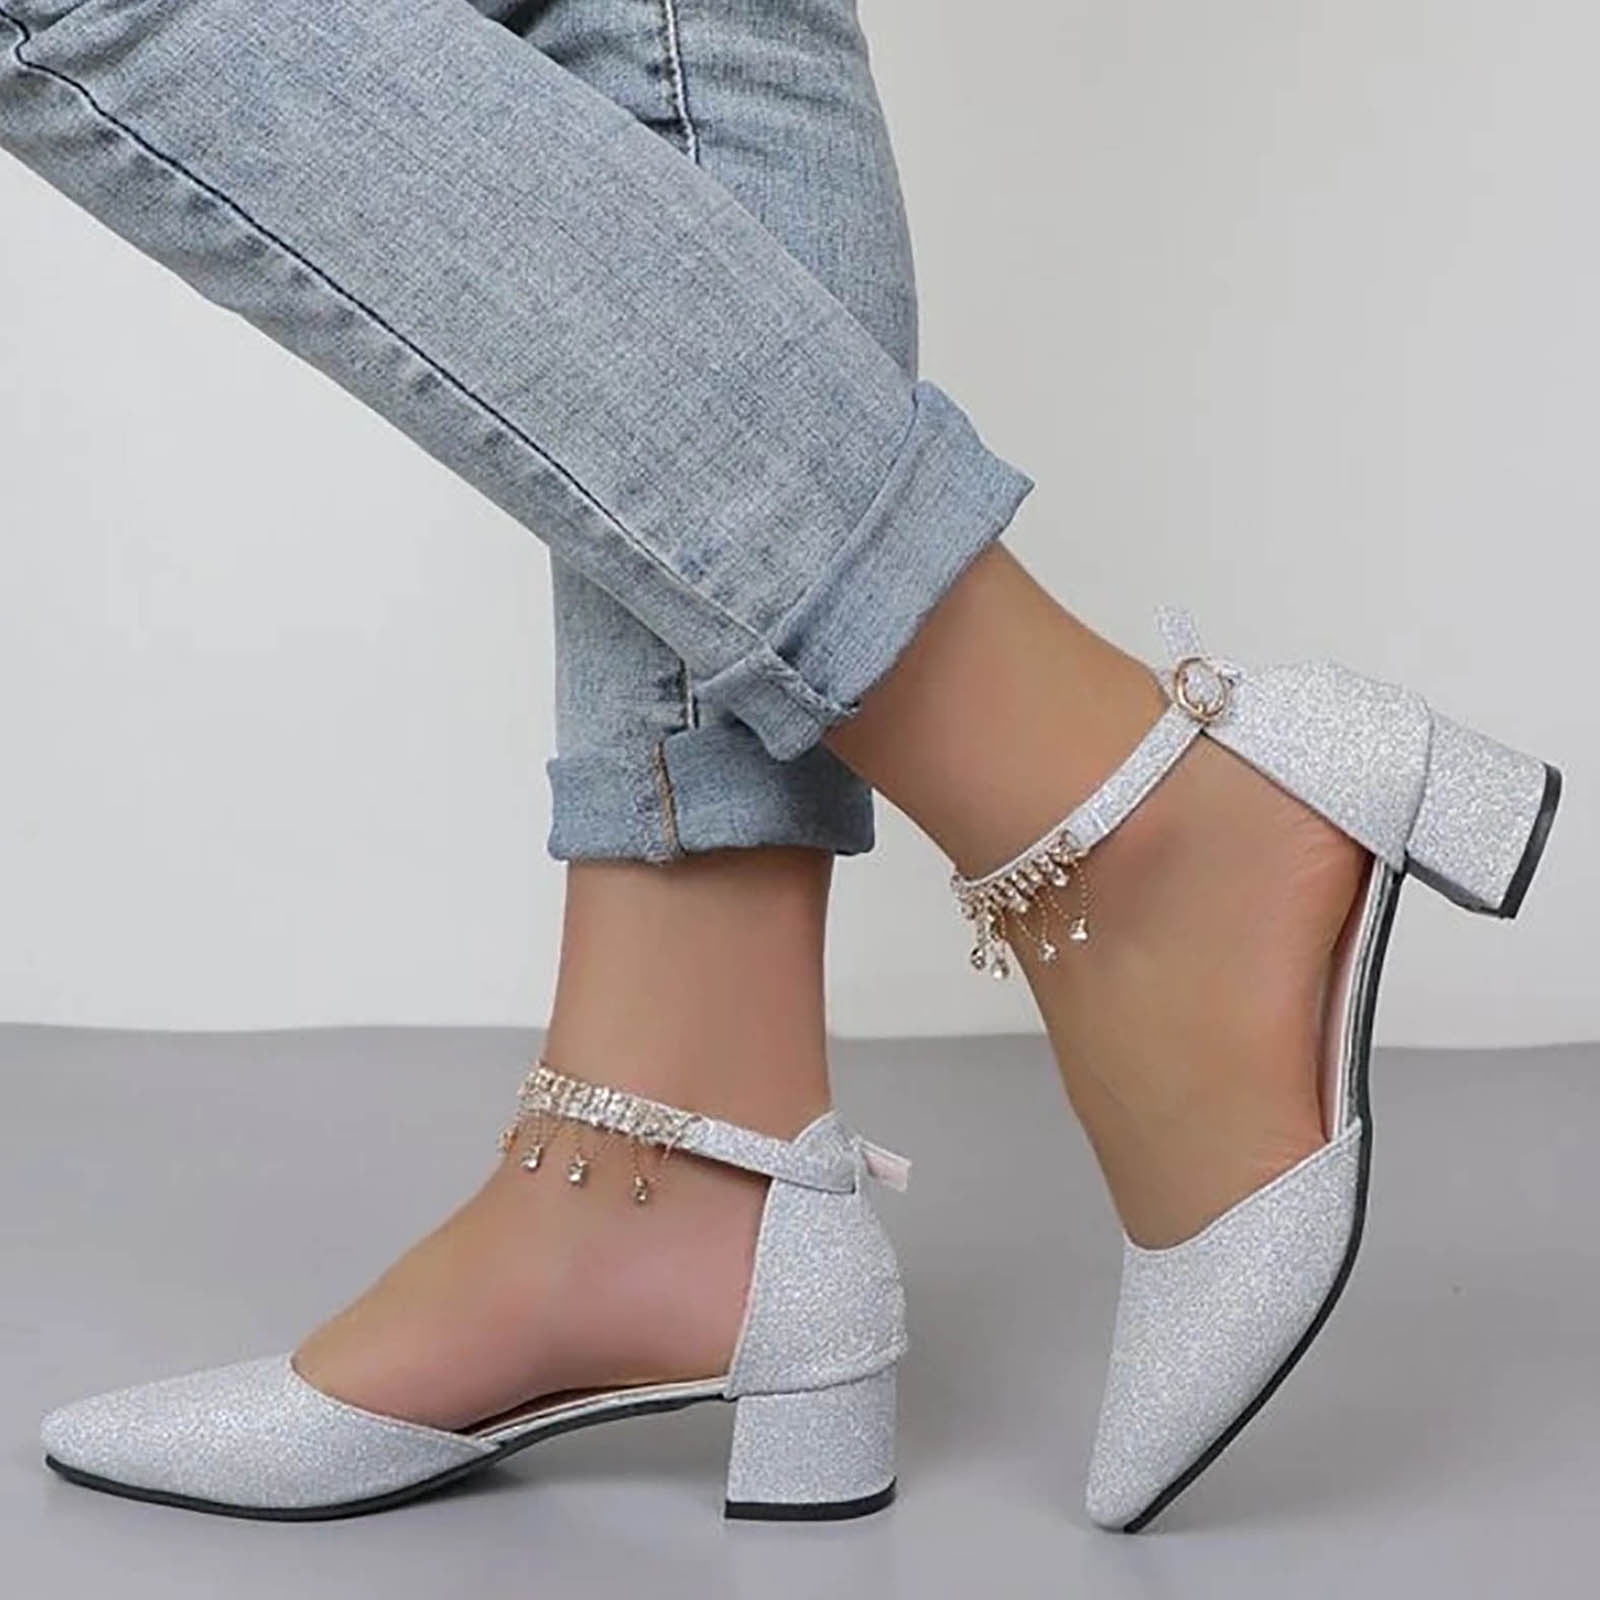 Padlock Ankle Strap Lock and Key Open Pointed Toe Heels White | eBay